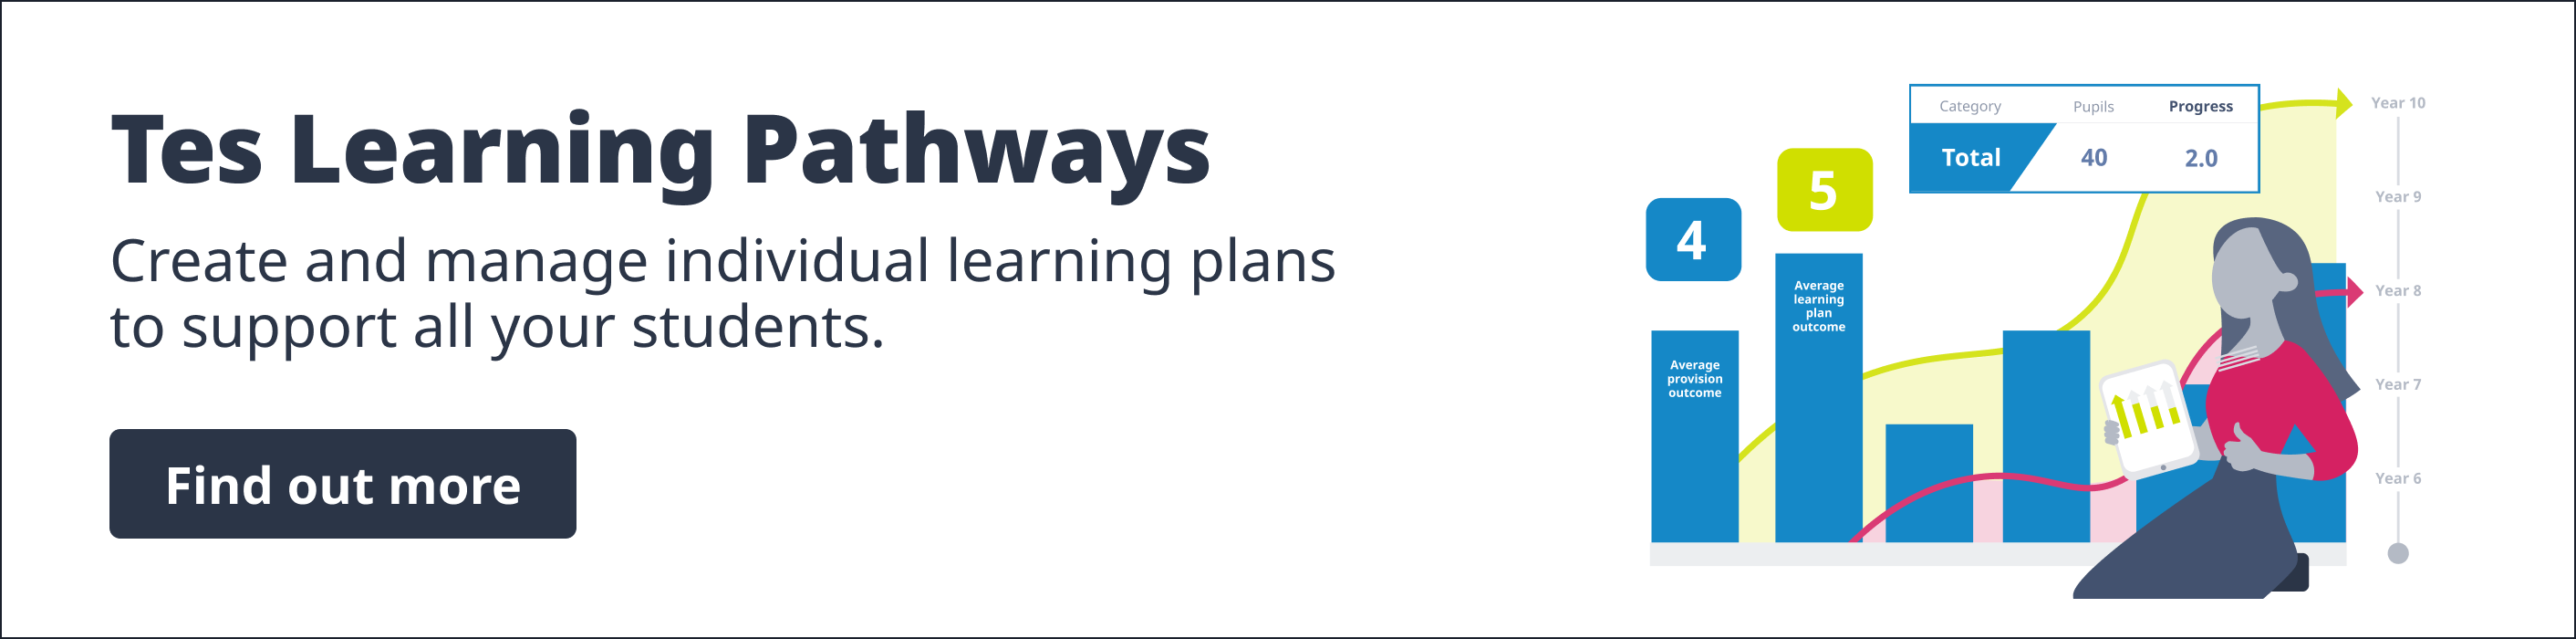 Tes Learning Pathways banner image